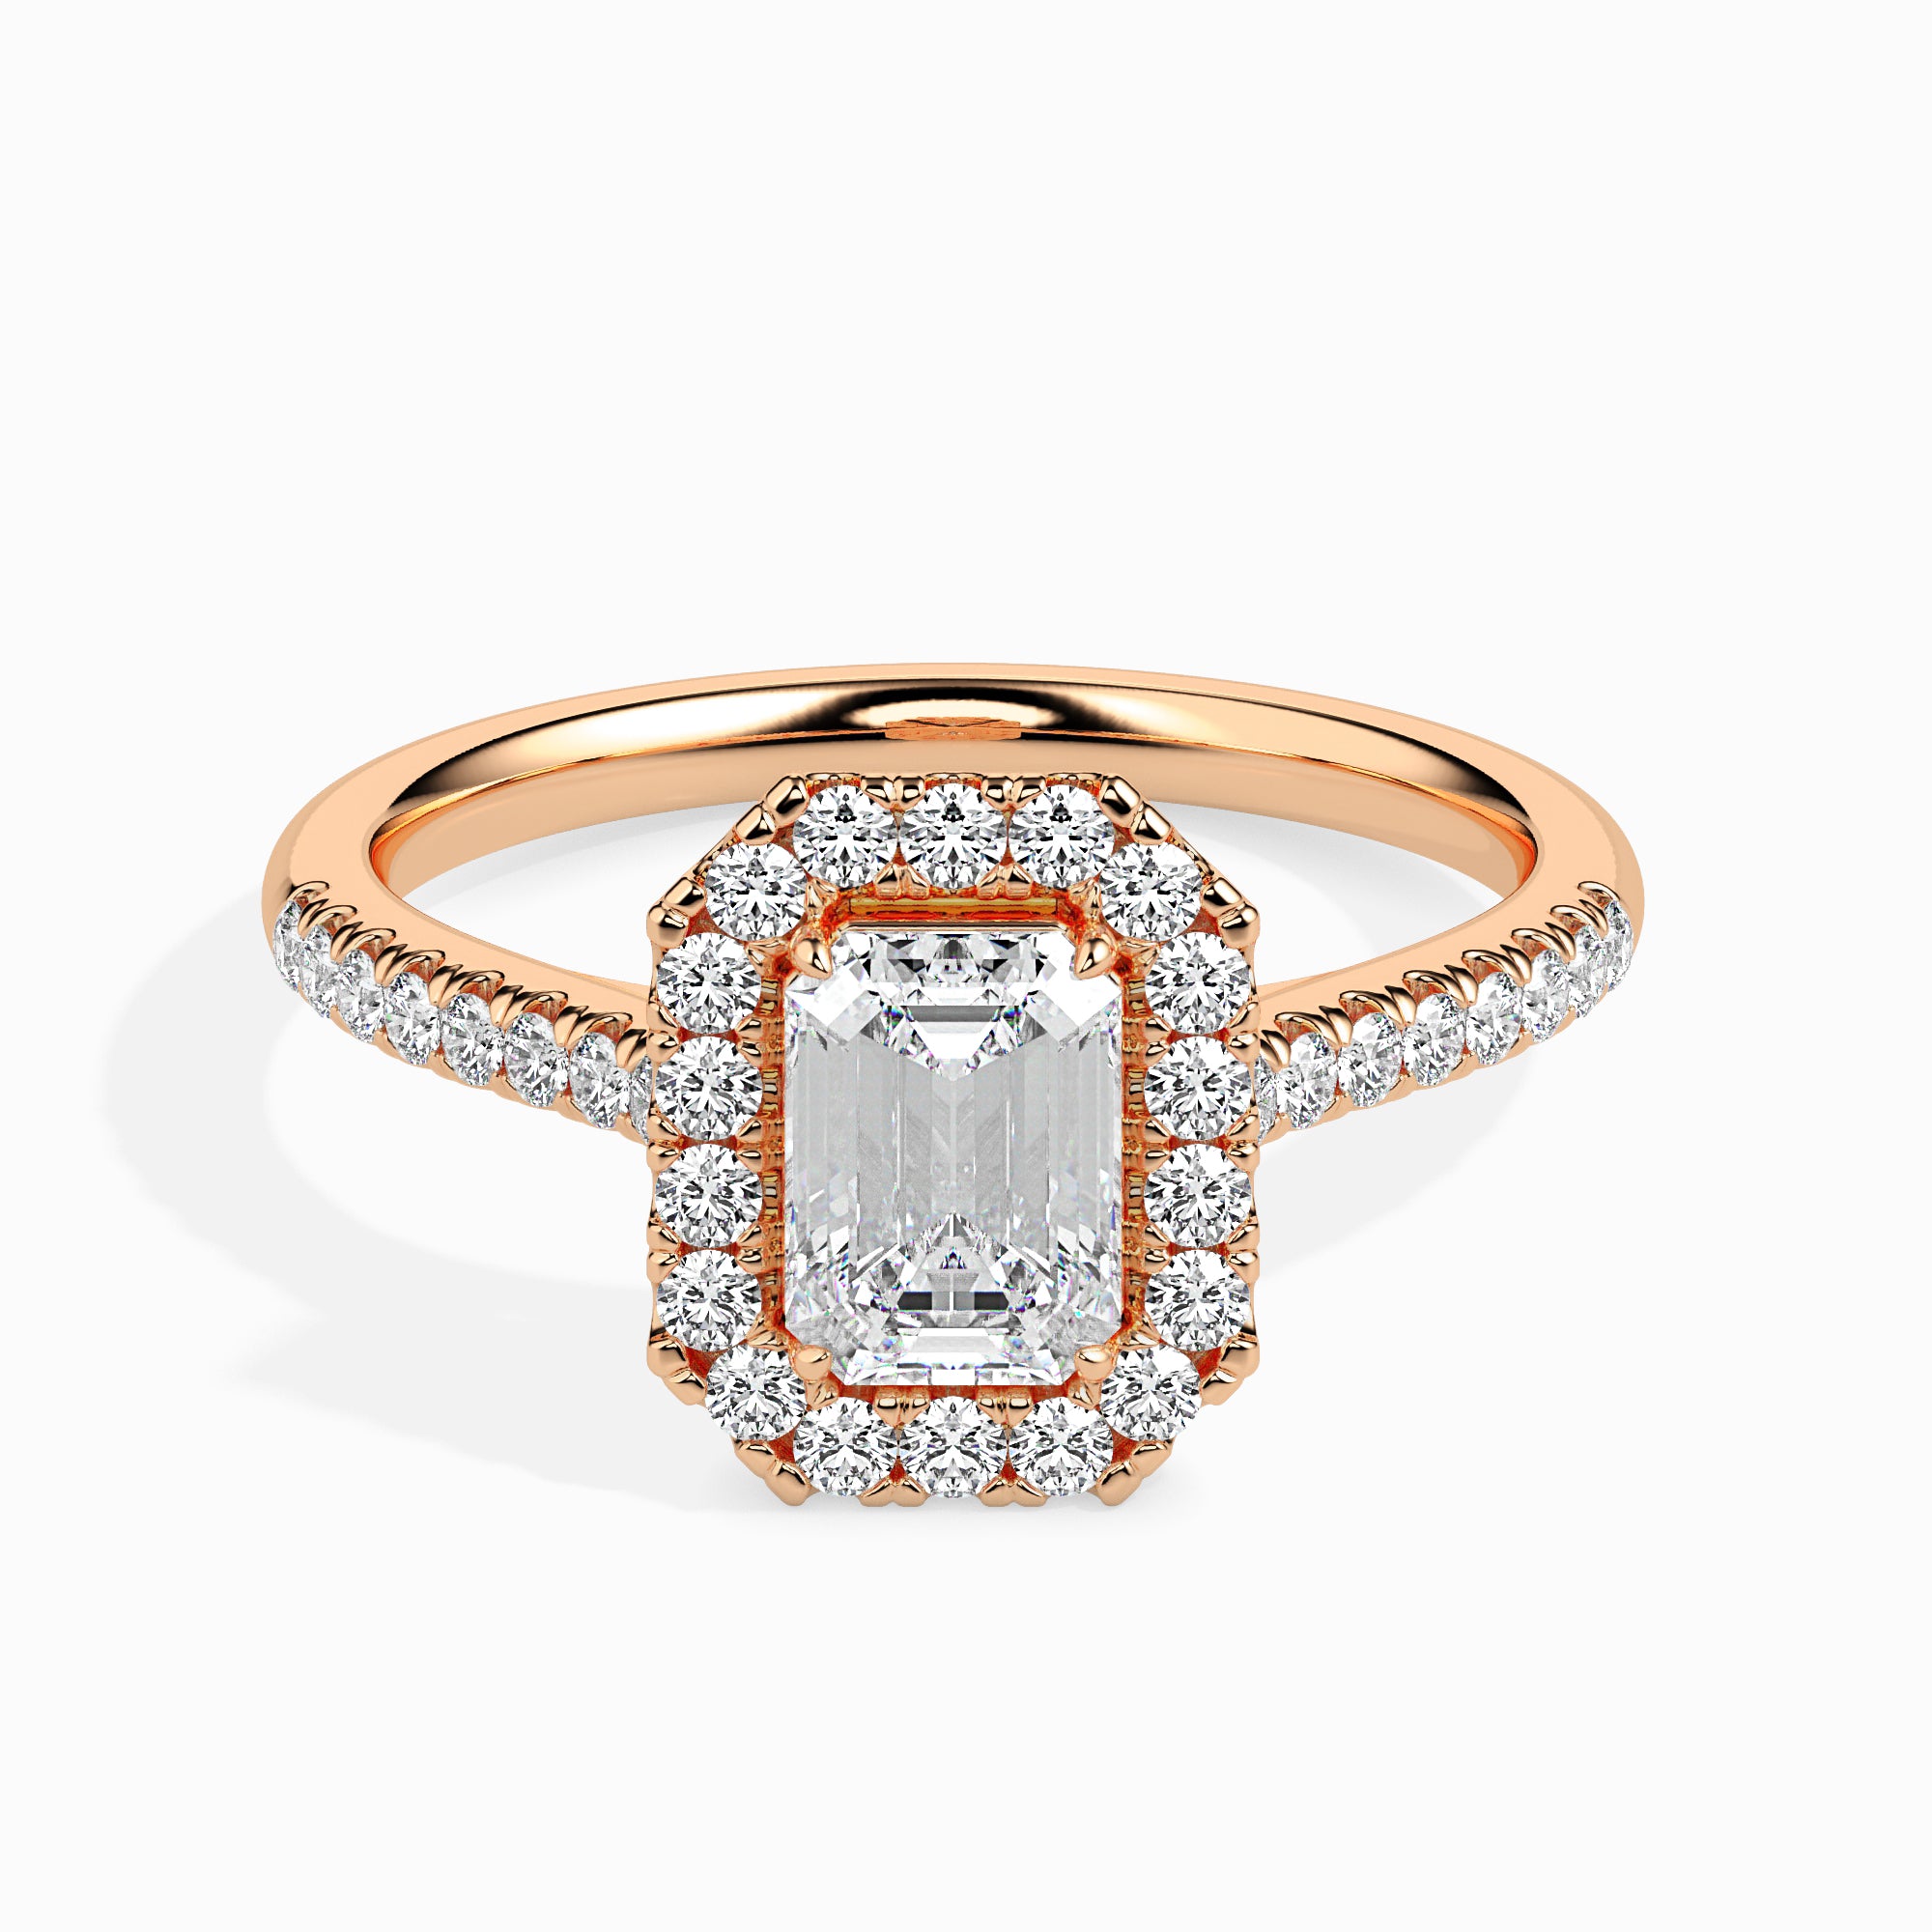 50-Pointer Emerald Cut Solitaire Halo Diamond Shank 18K Rose Gold Solitaire Ring JL AU 19035R-A